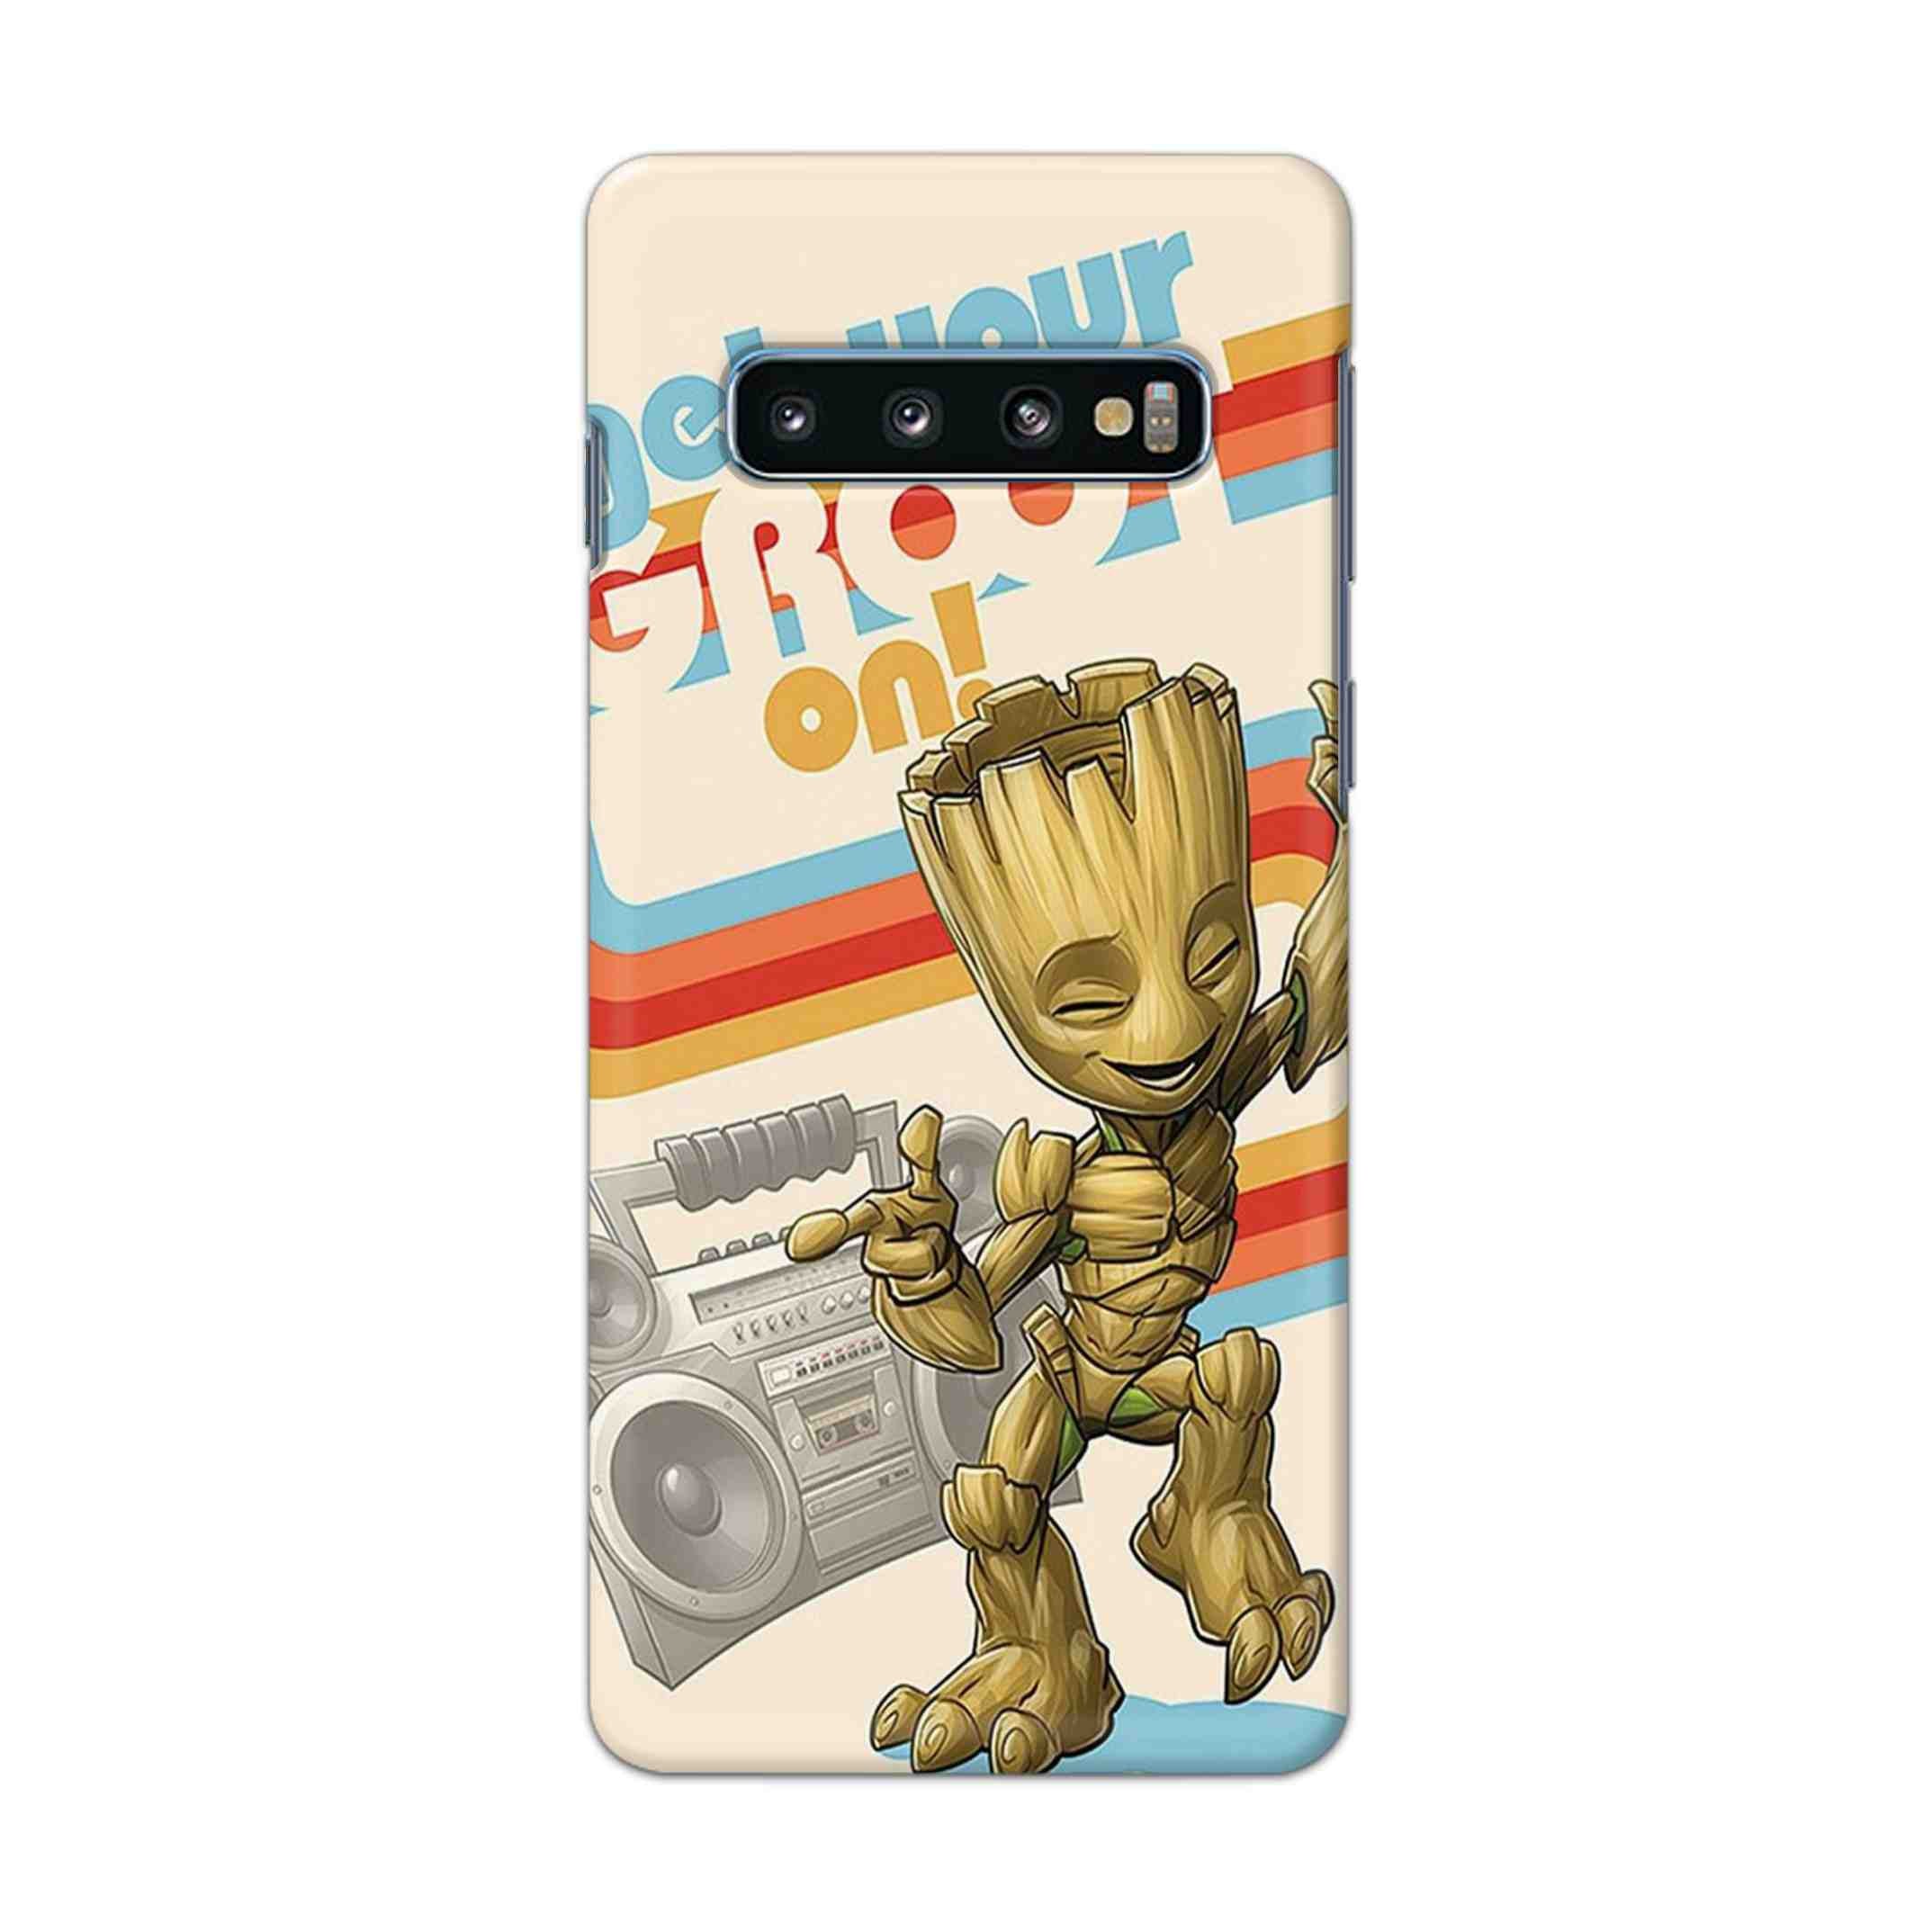 Buy Groot Hard Back Mobile Phone Case Cover For Samsung Galaxy S10 Plus Online